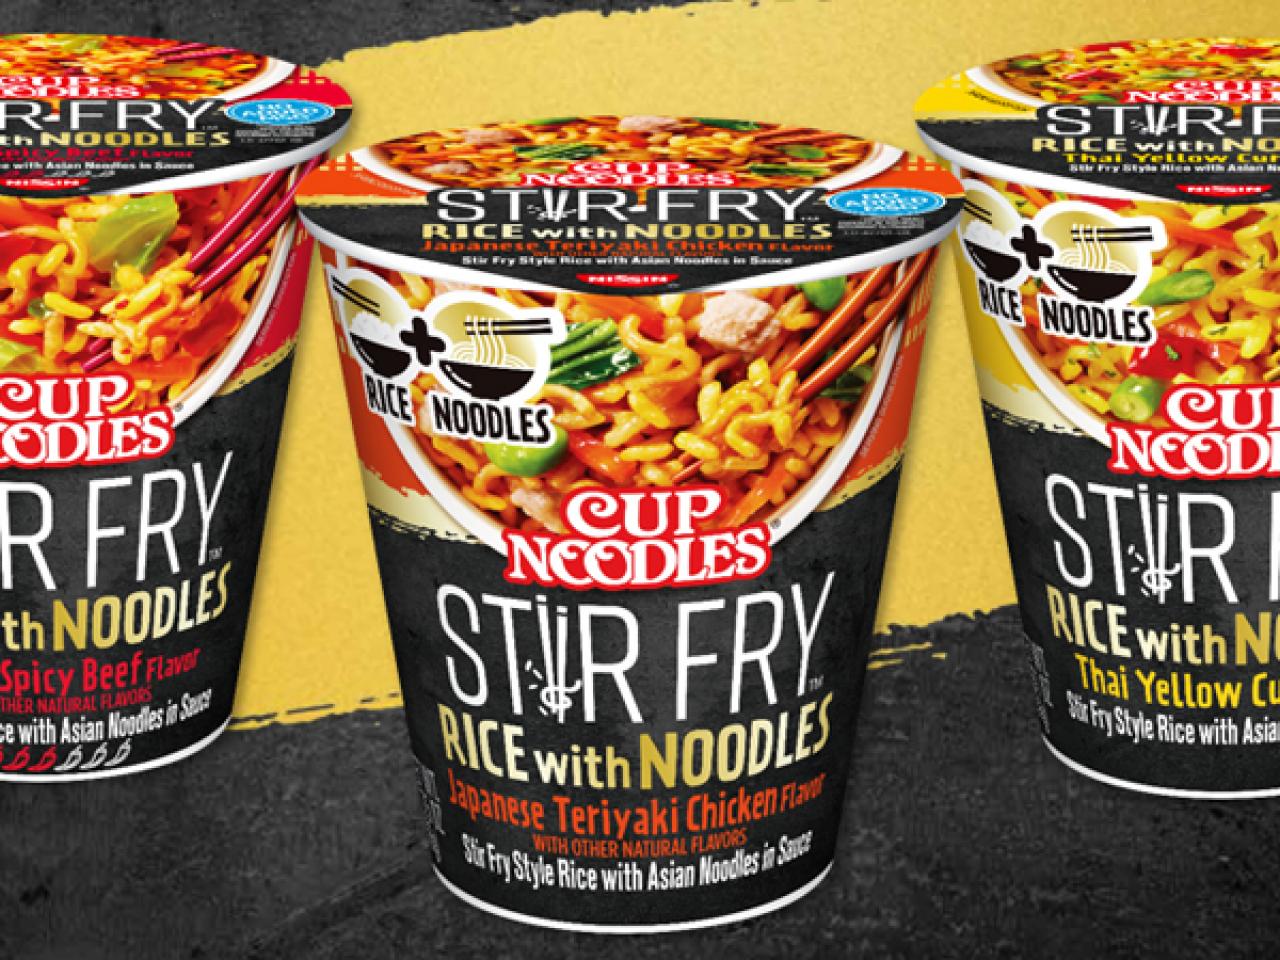 Cup Noodles Launches Stir Fry Rice With Noodles | FN Dish - Behind-the ...